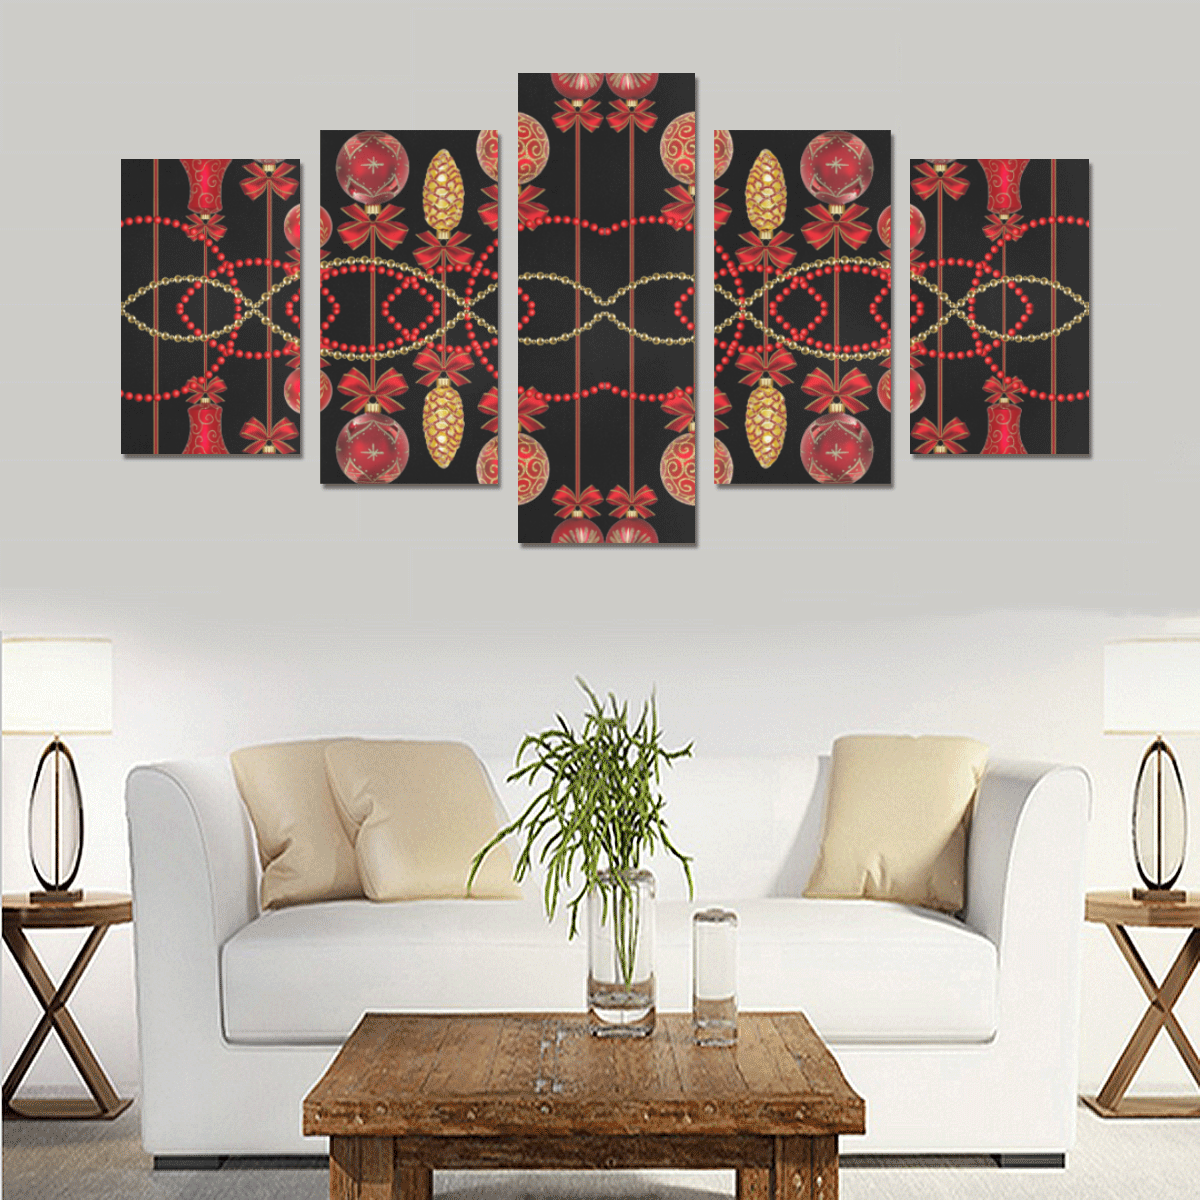 Red and Gold Christmas Ornaments Canvas Print Sets C (No Frame)